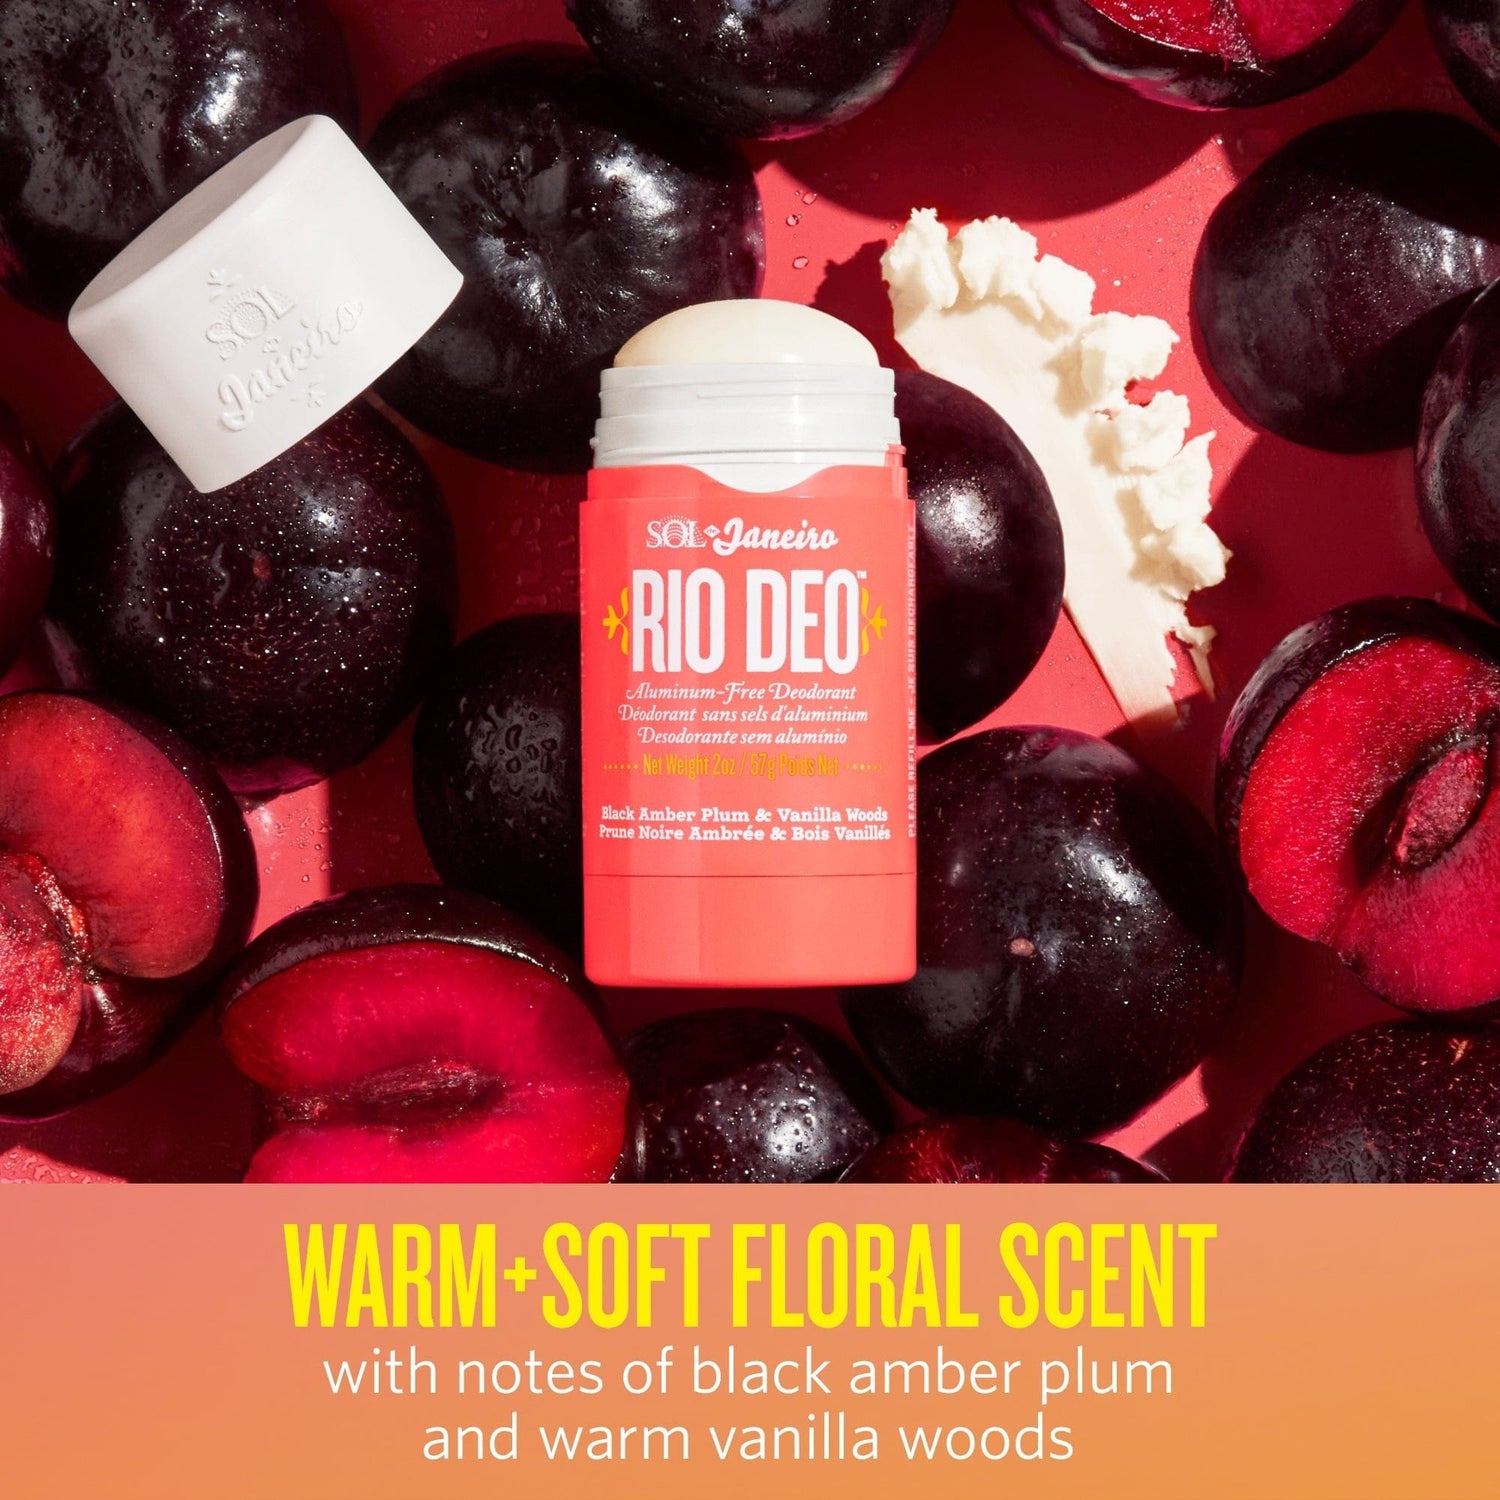 Warm + soft floral scent, with notes of black amber plum and warm vanilla woods